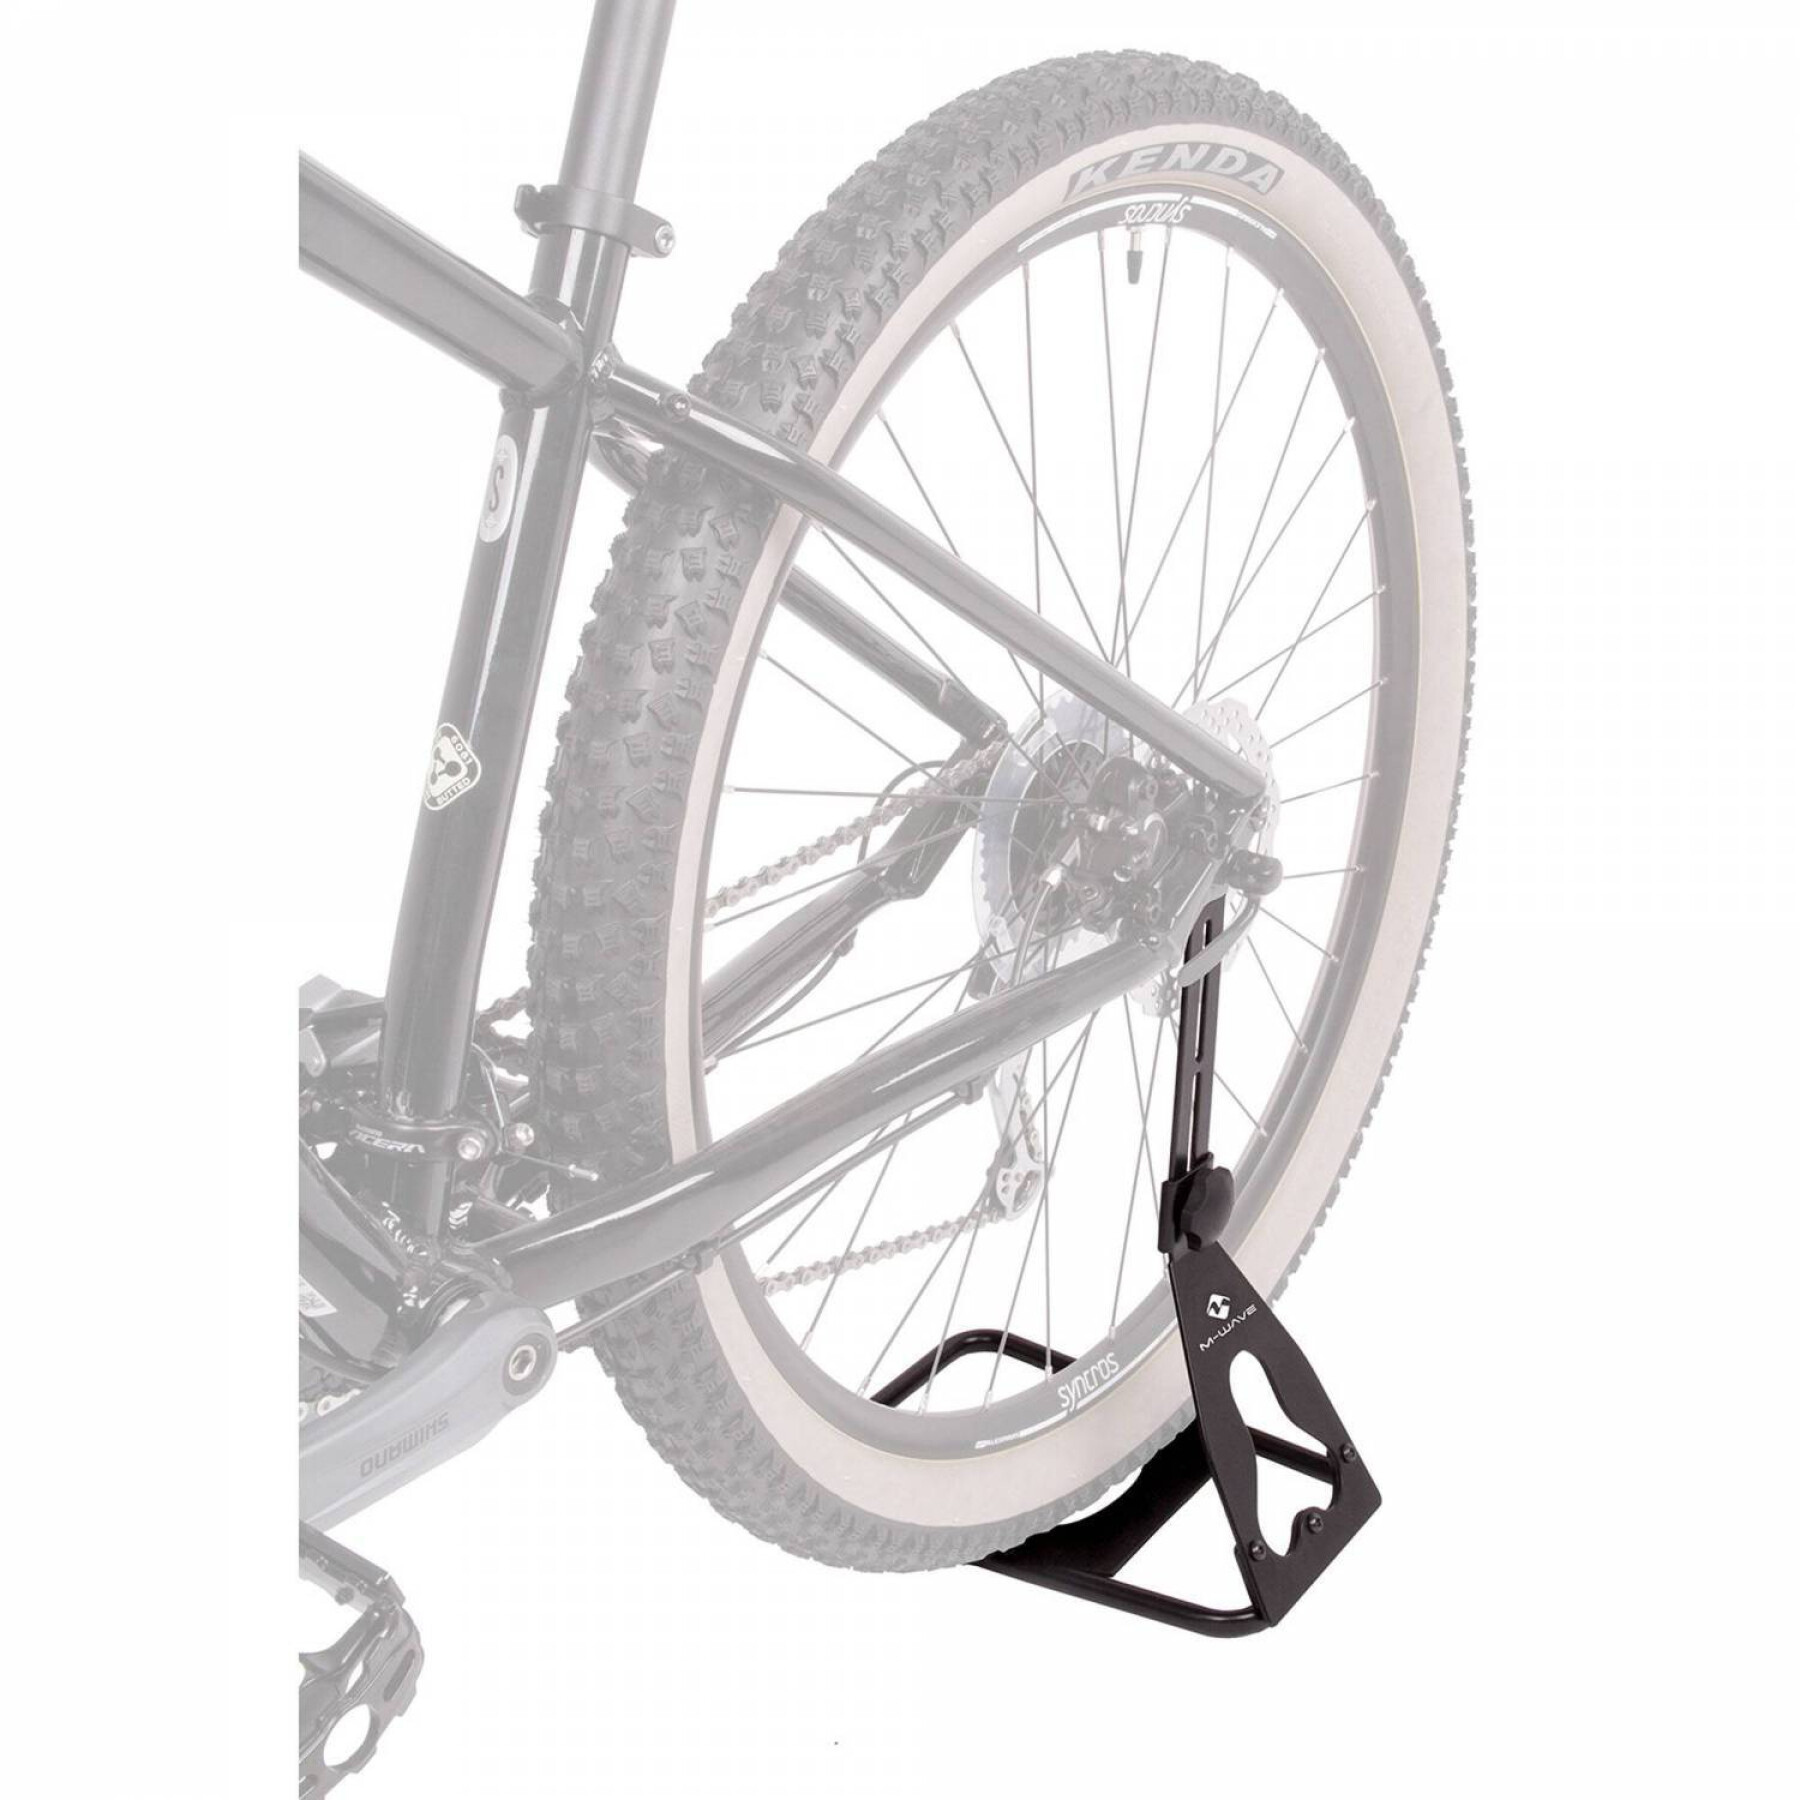 Adjustable rear wheel bike carrier with height adapter M-Wave